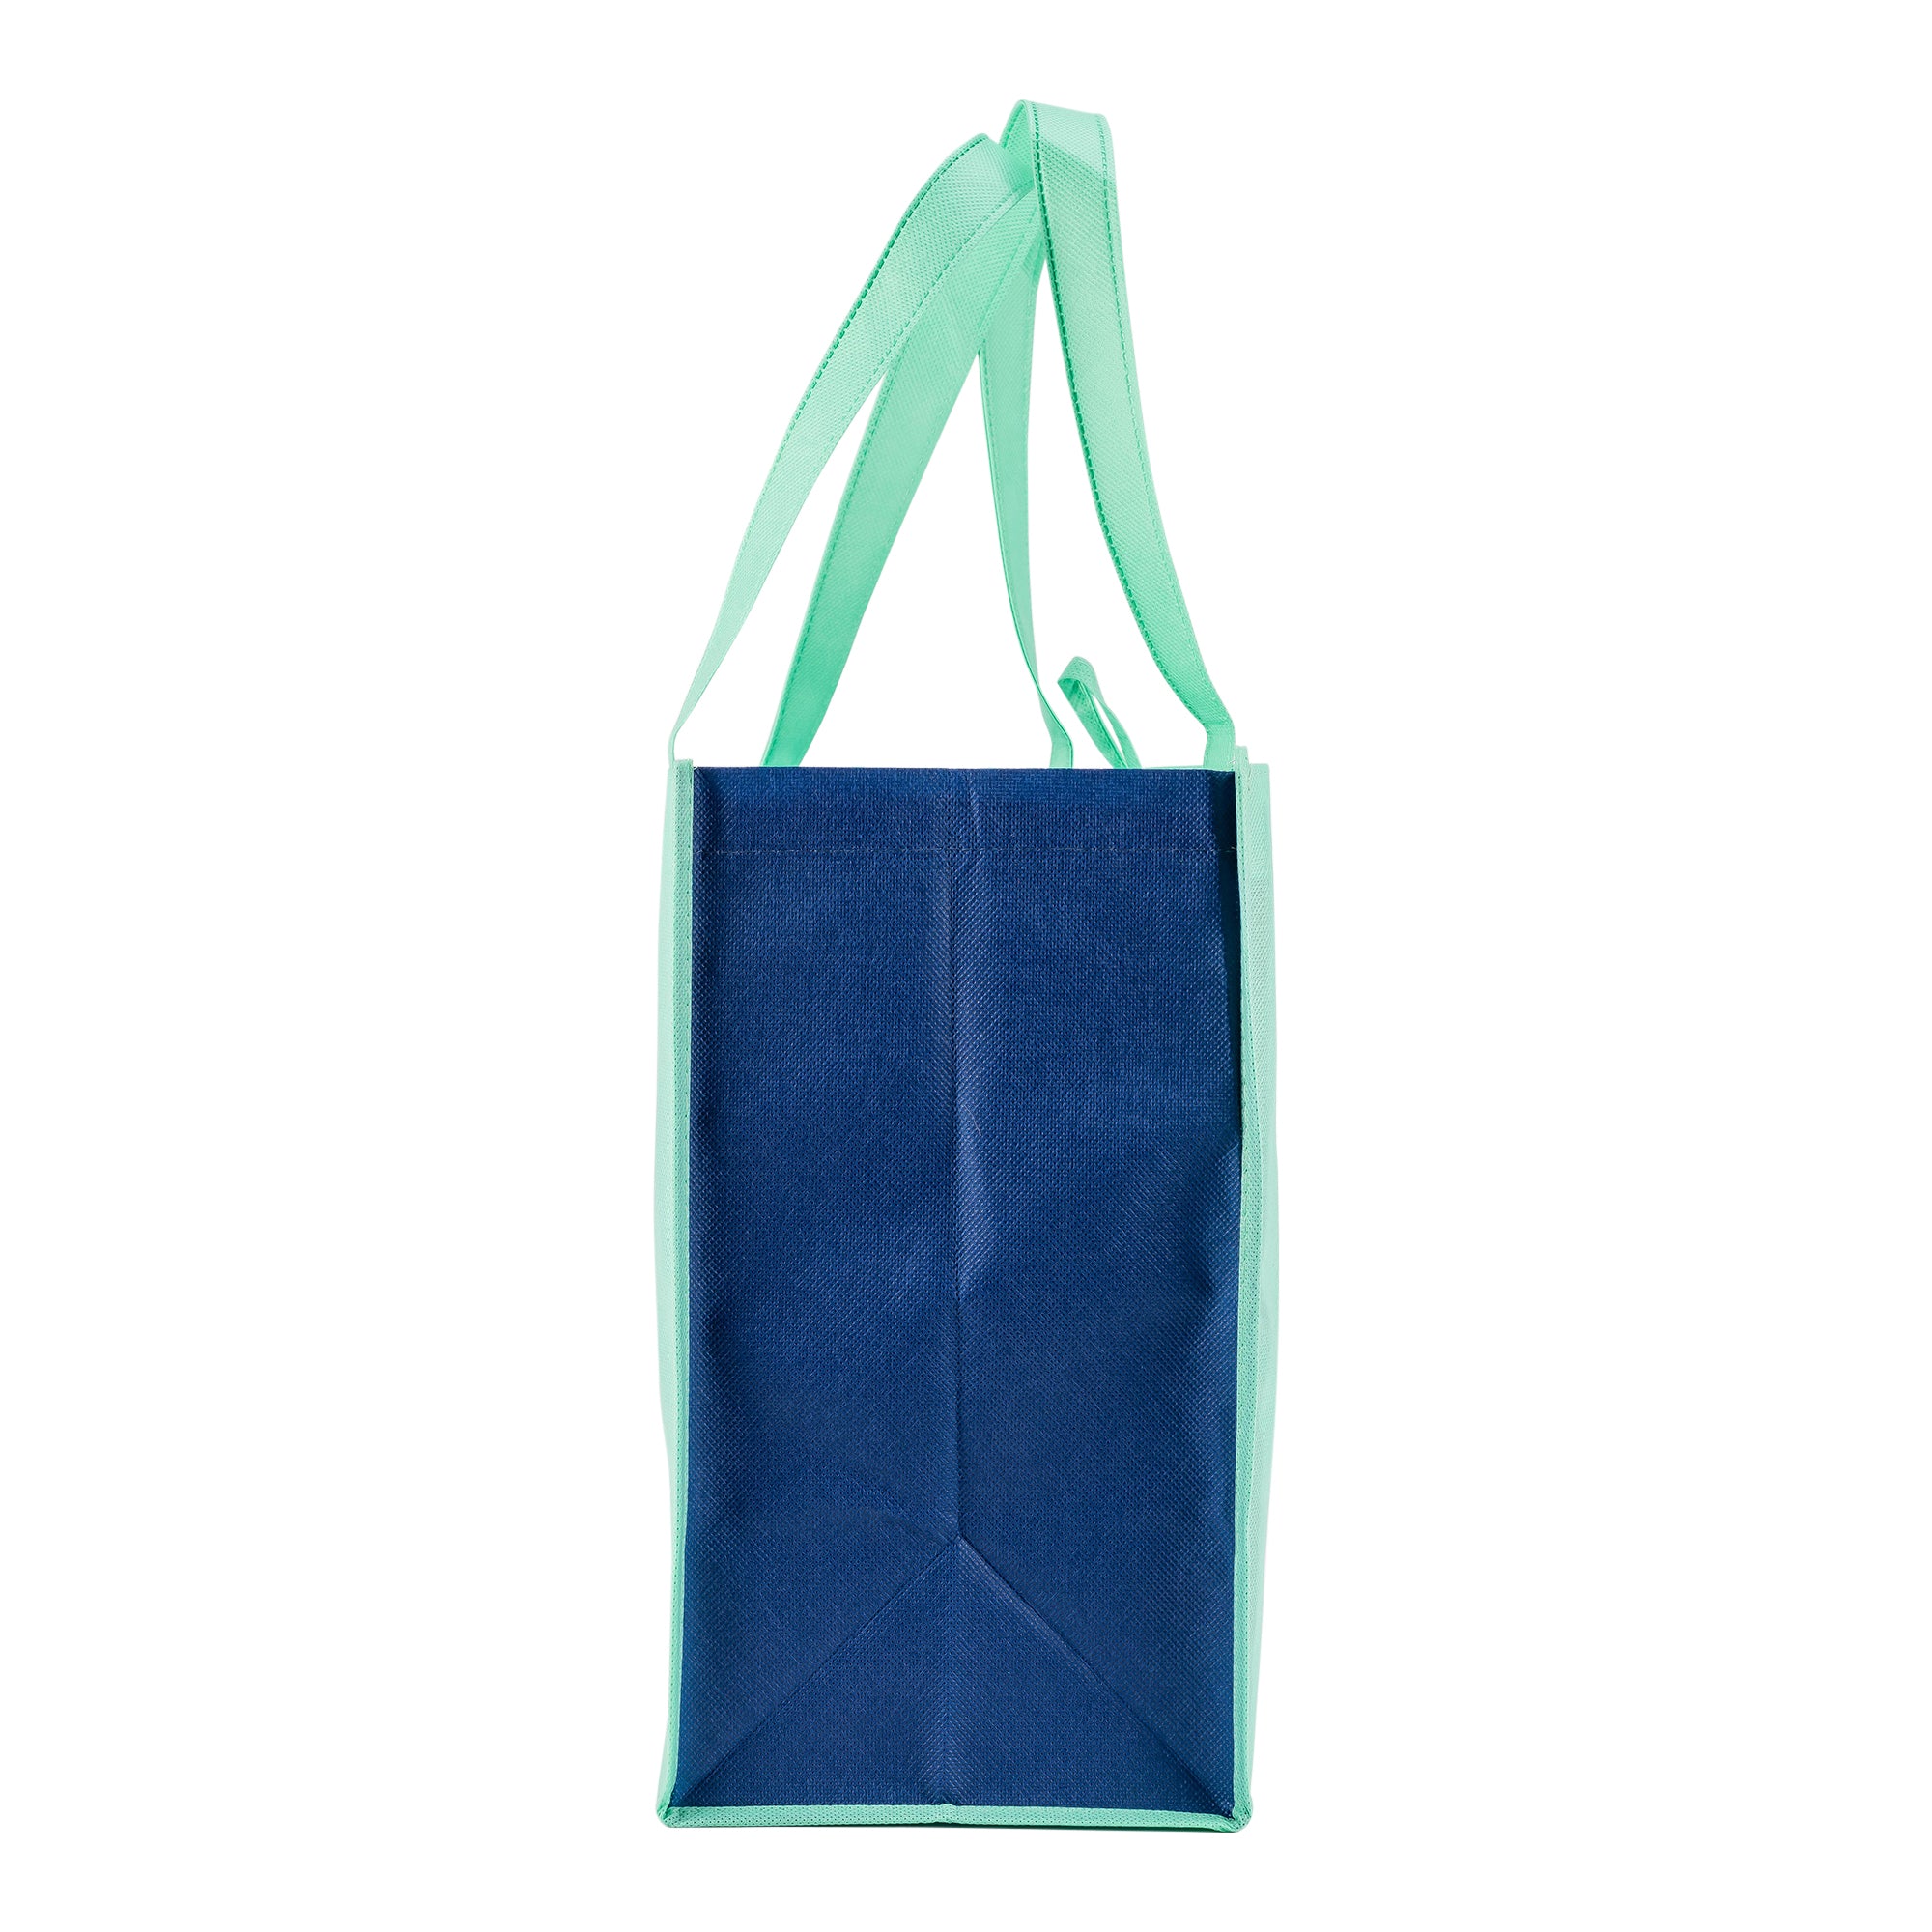 ECO Totes: A Friend Loves